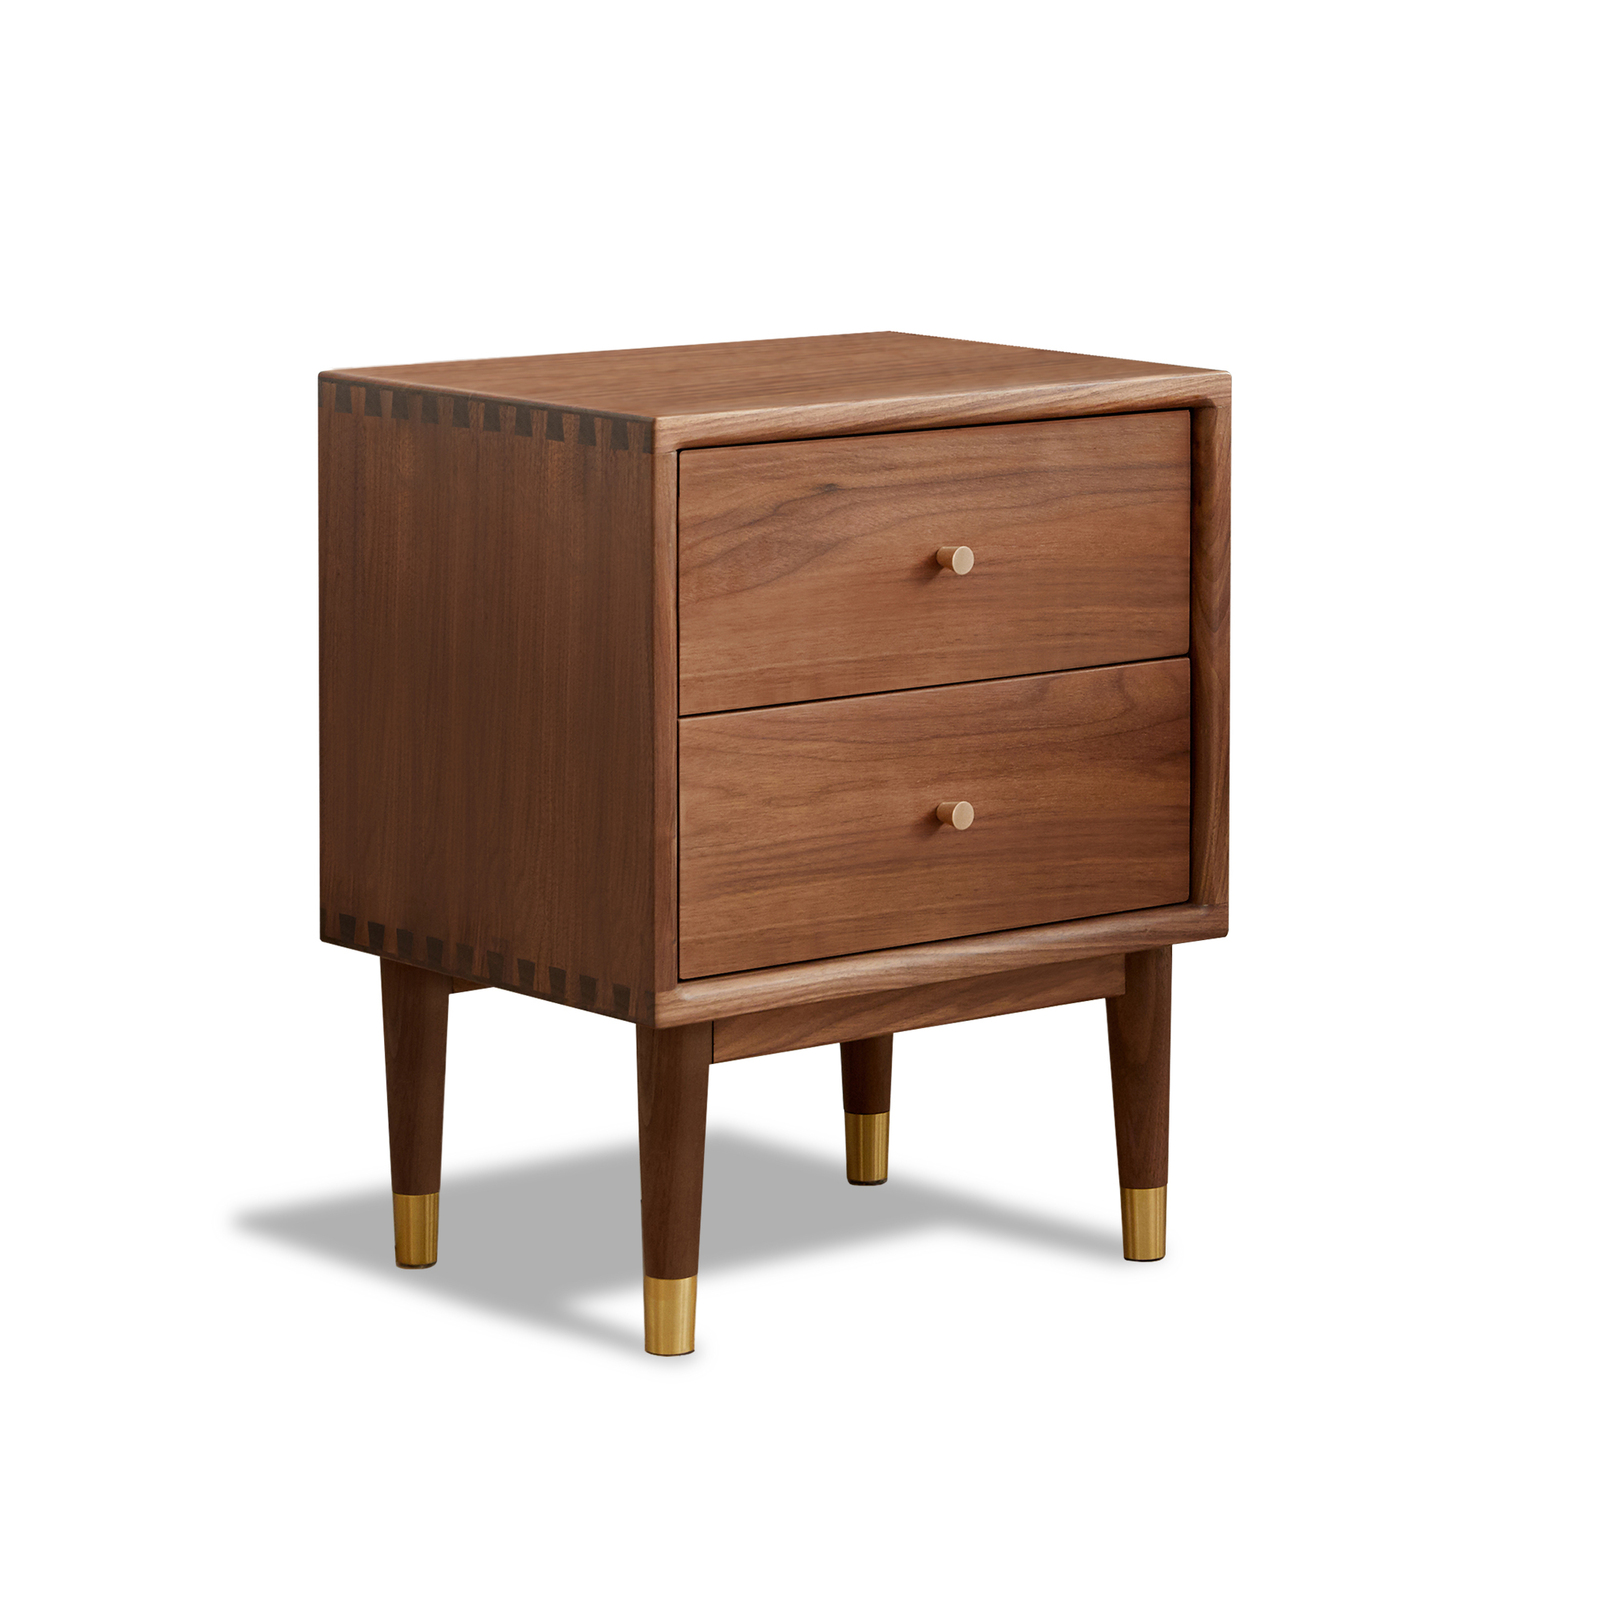 MIUZ Solid Walnut Timber Bedside Tables Drawers Side Table Nightstand Storage Cabinet Wood